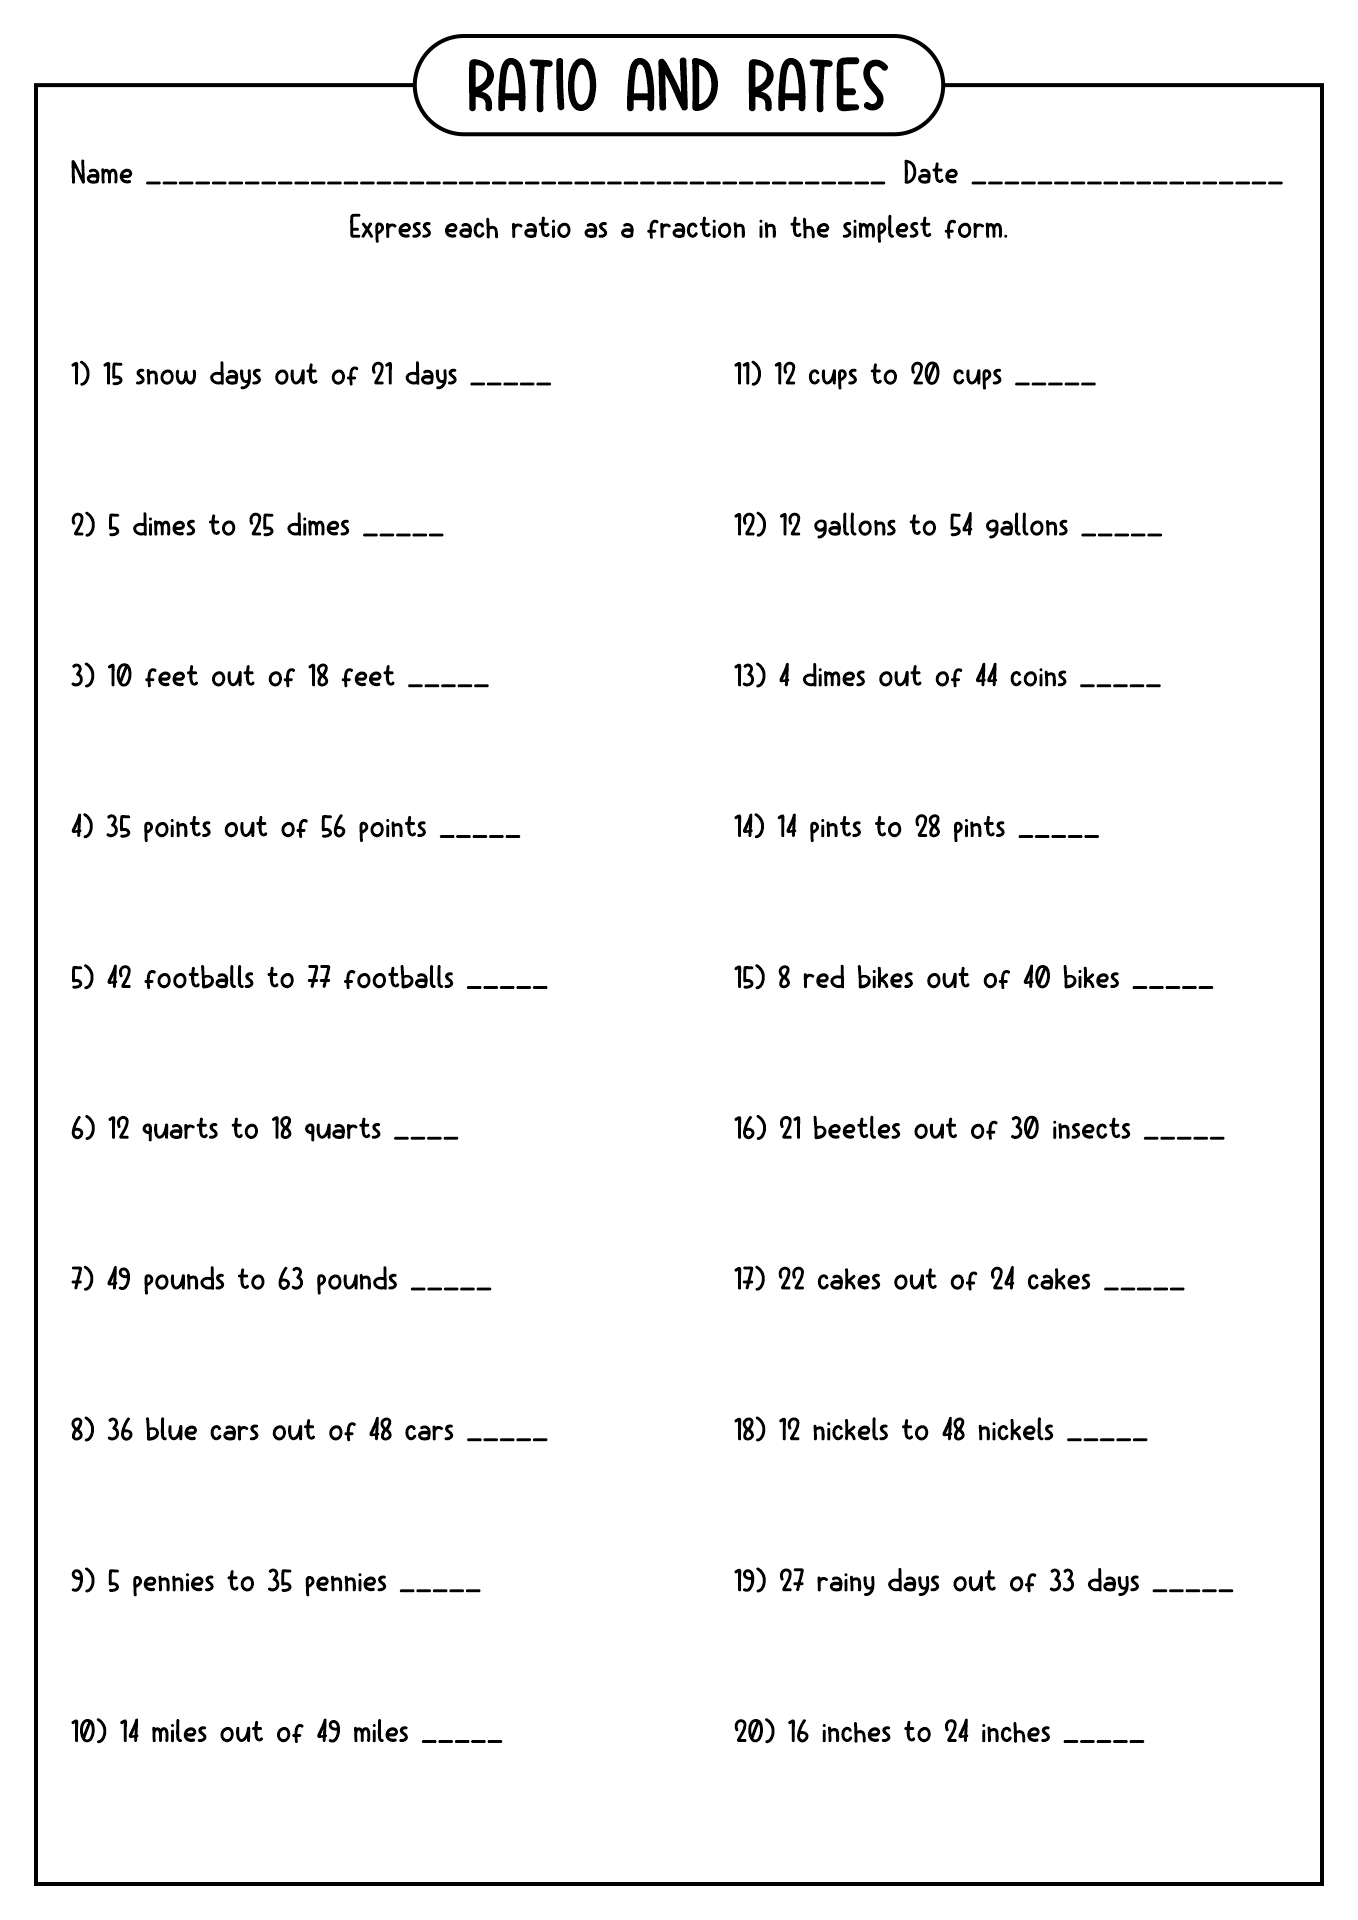 10 Best Images of Proportion Problems Worksheet - 6th ...